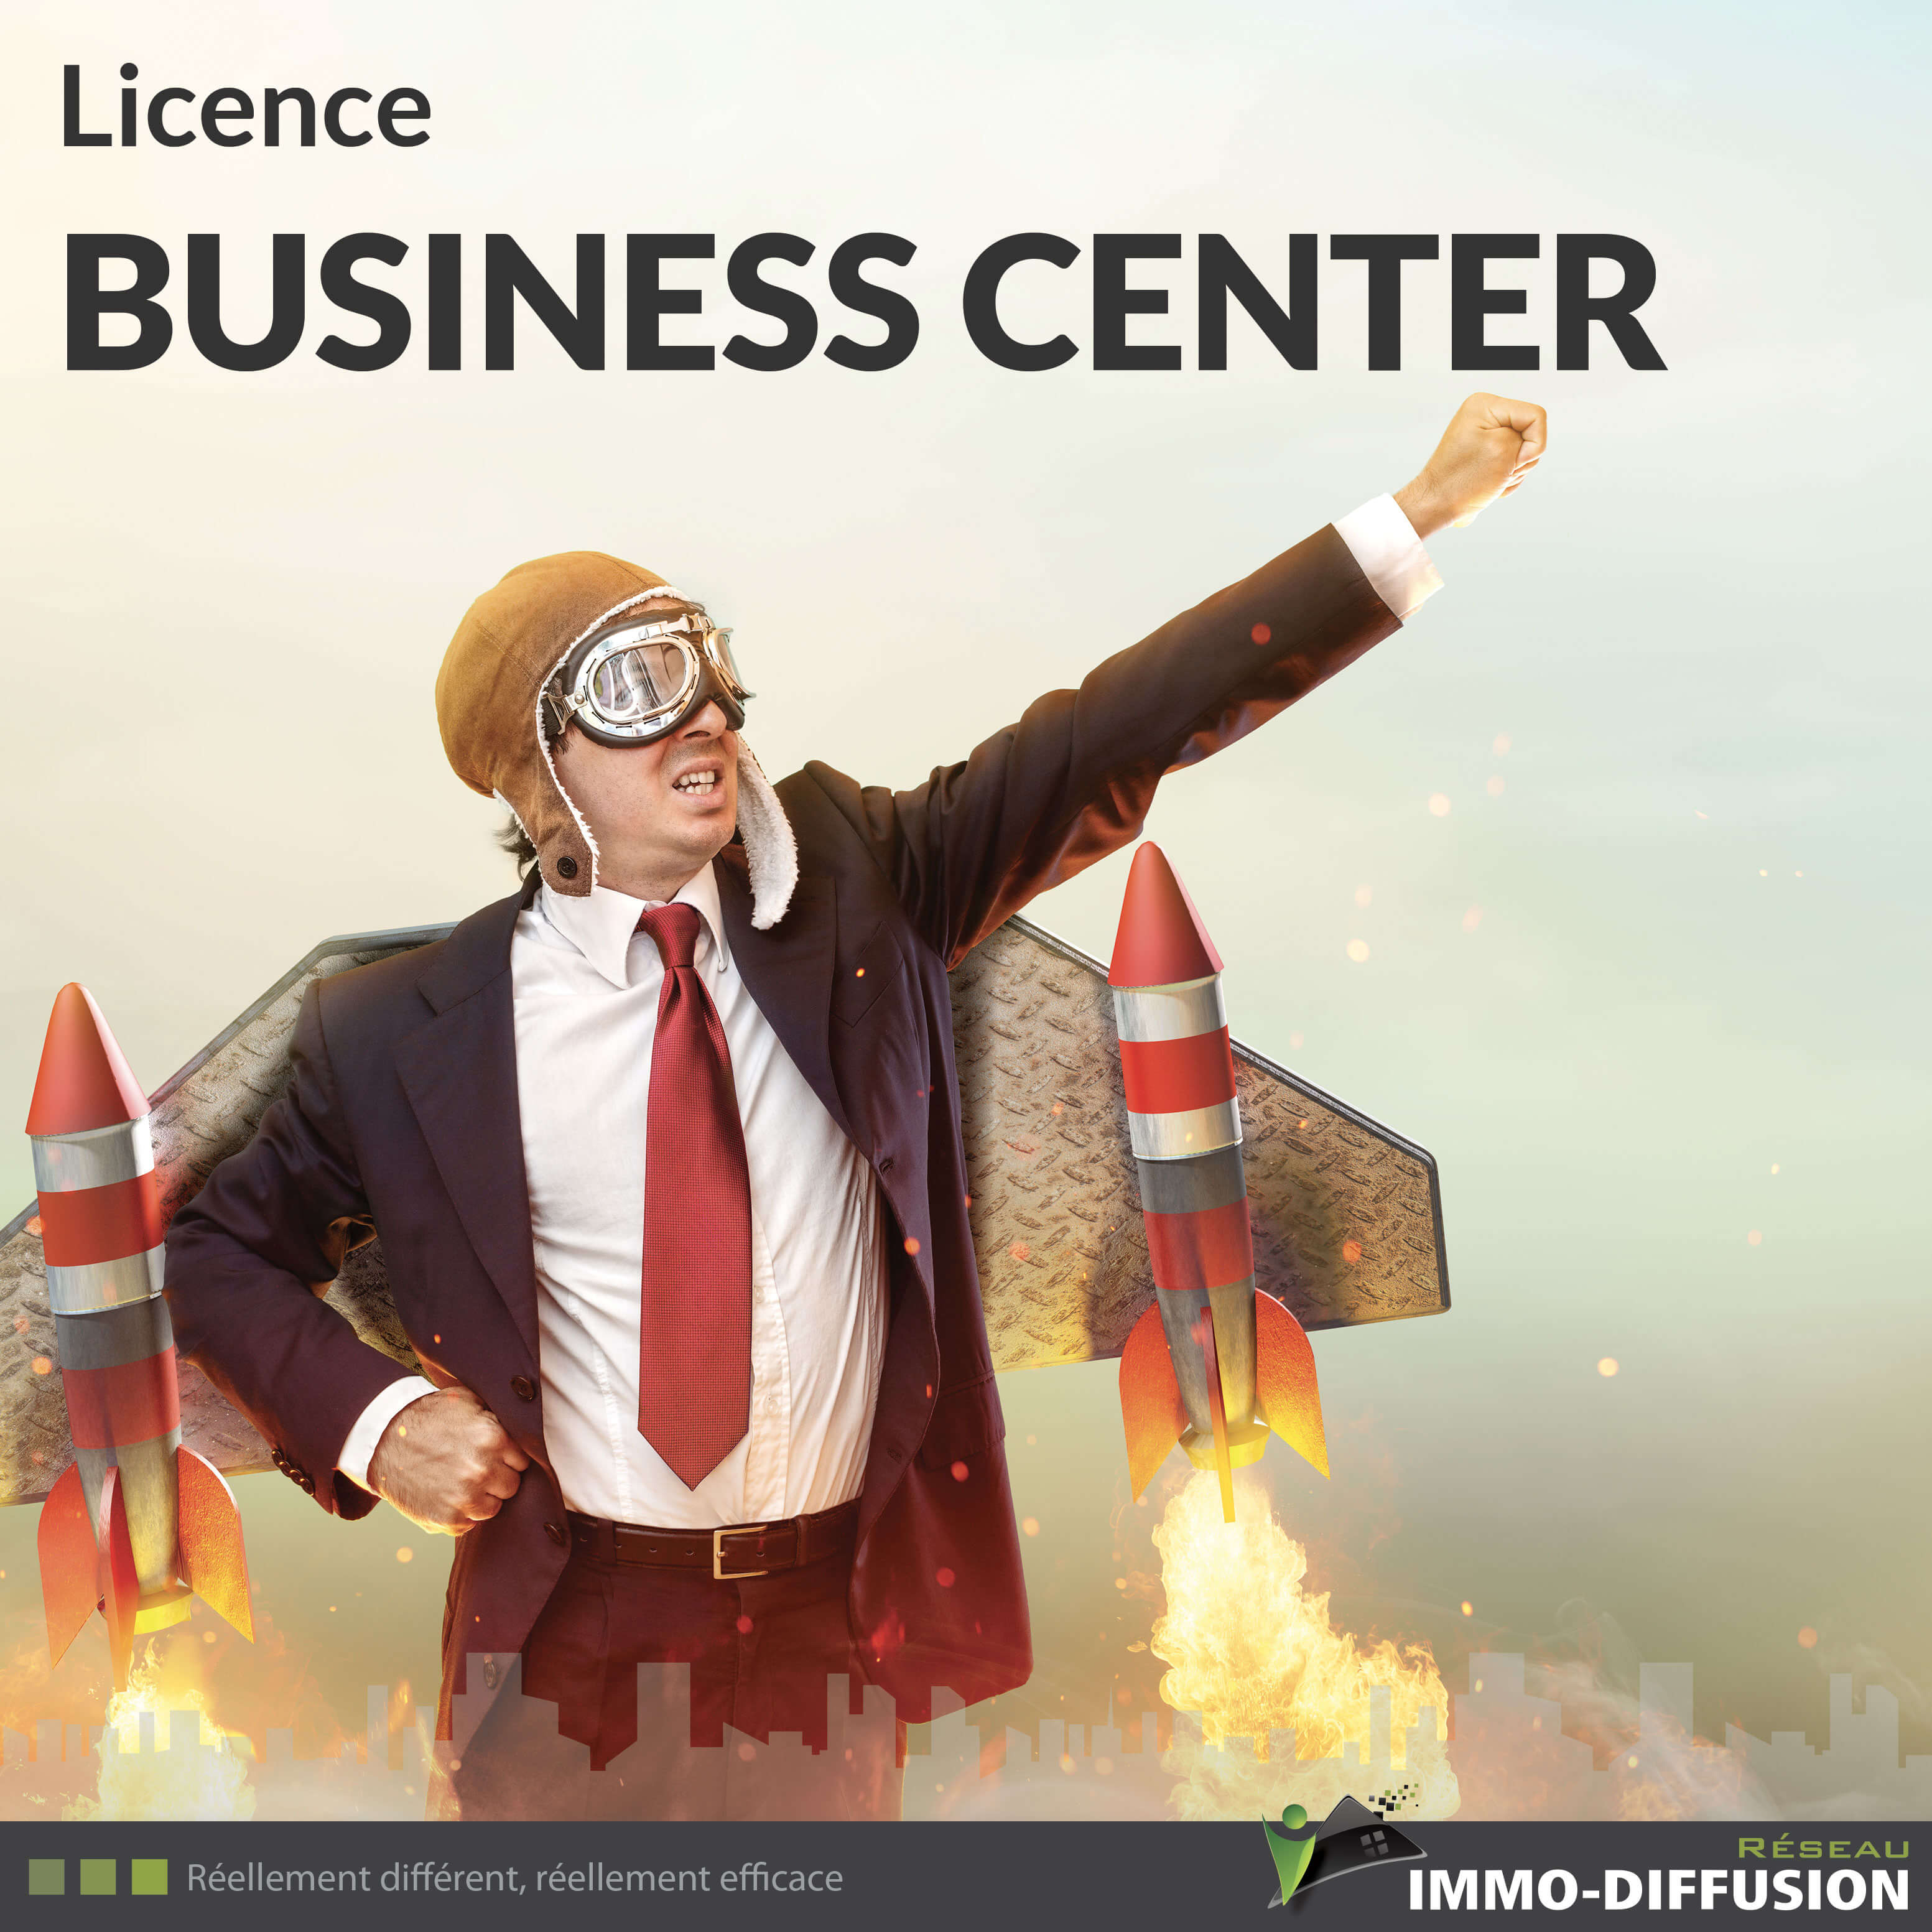 Licence BUSINESS CENTER